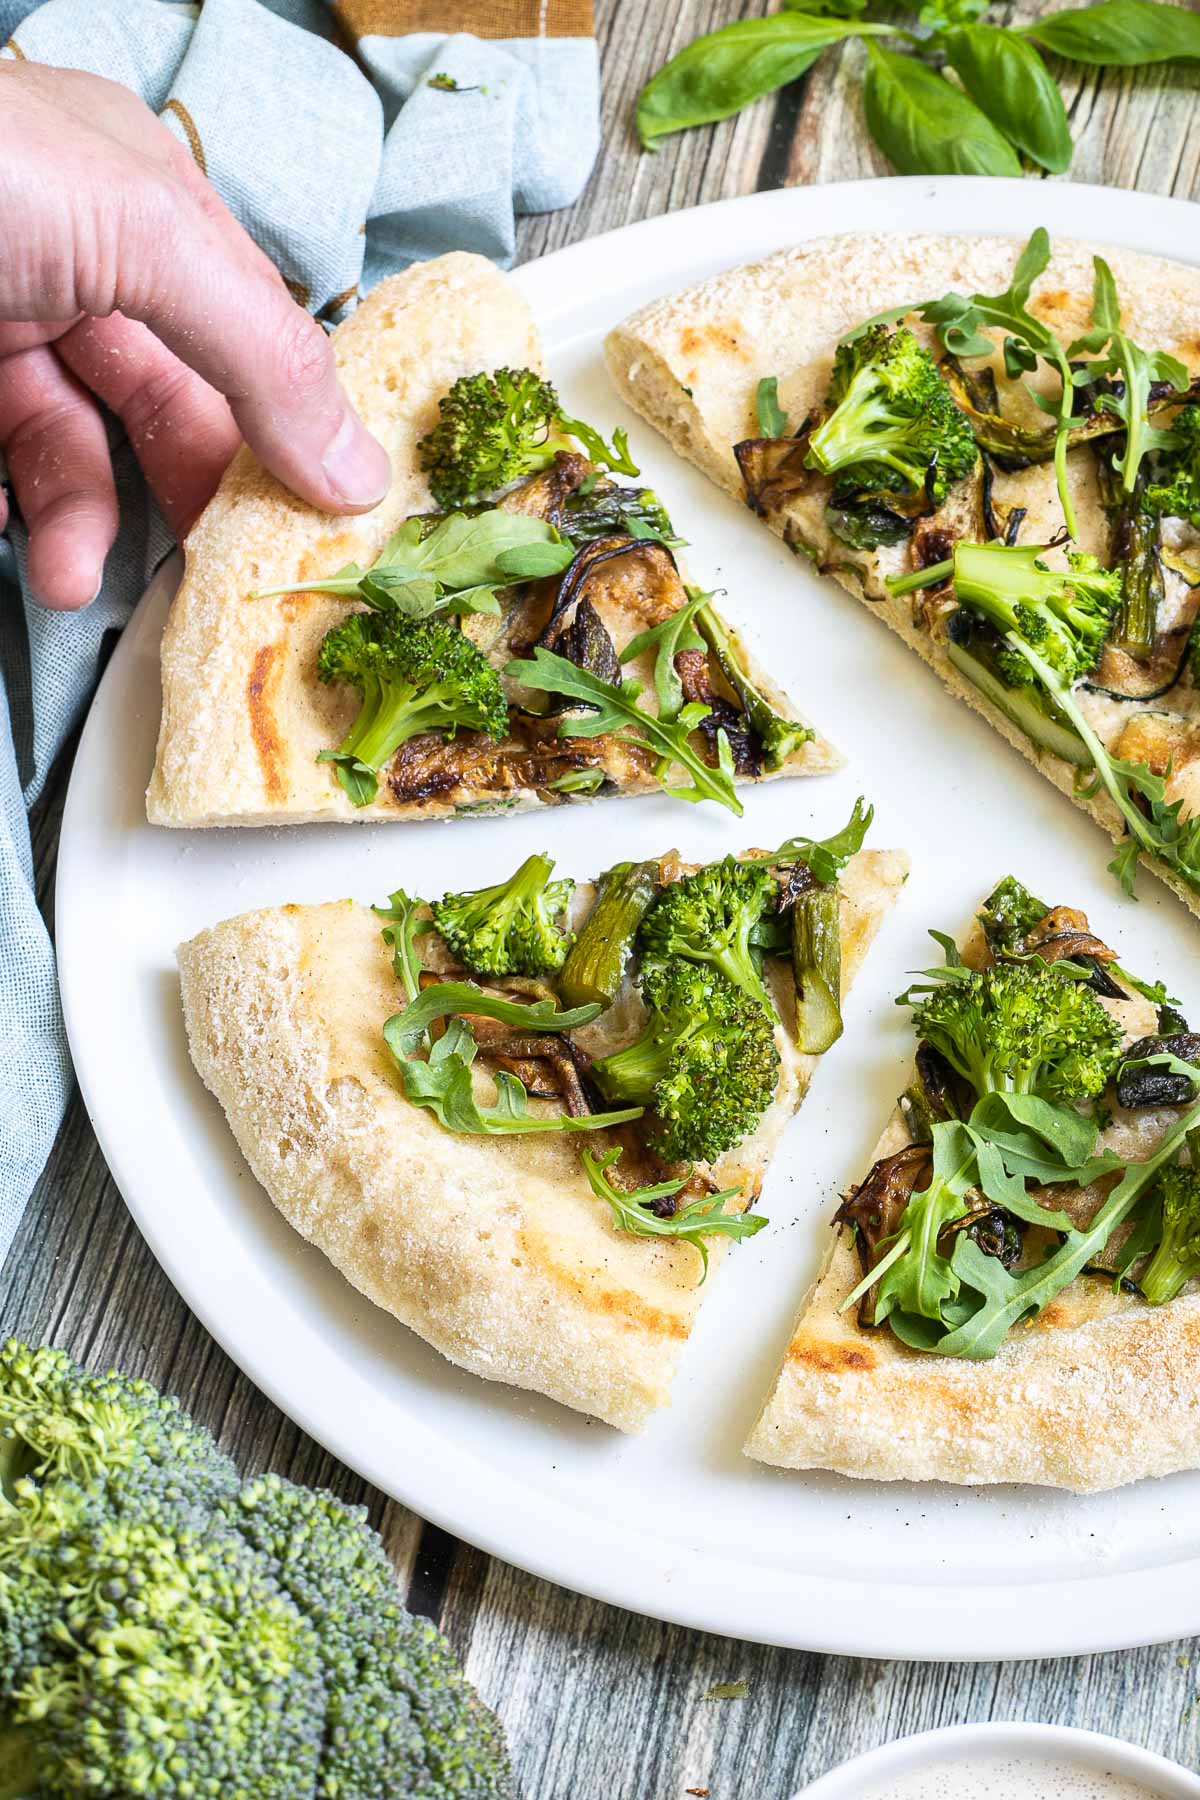 Sliced pizza on a white pizza plate topped with white sauce, zucchini, broccoli, asparagus, mushrooms, and fresh arugula. A hand is taking one slice.